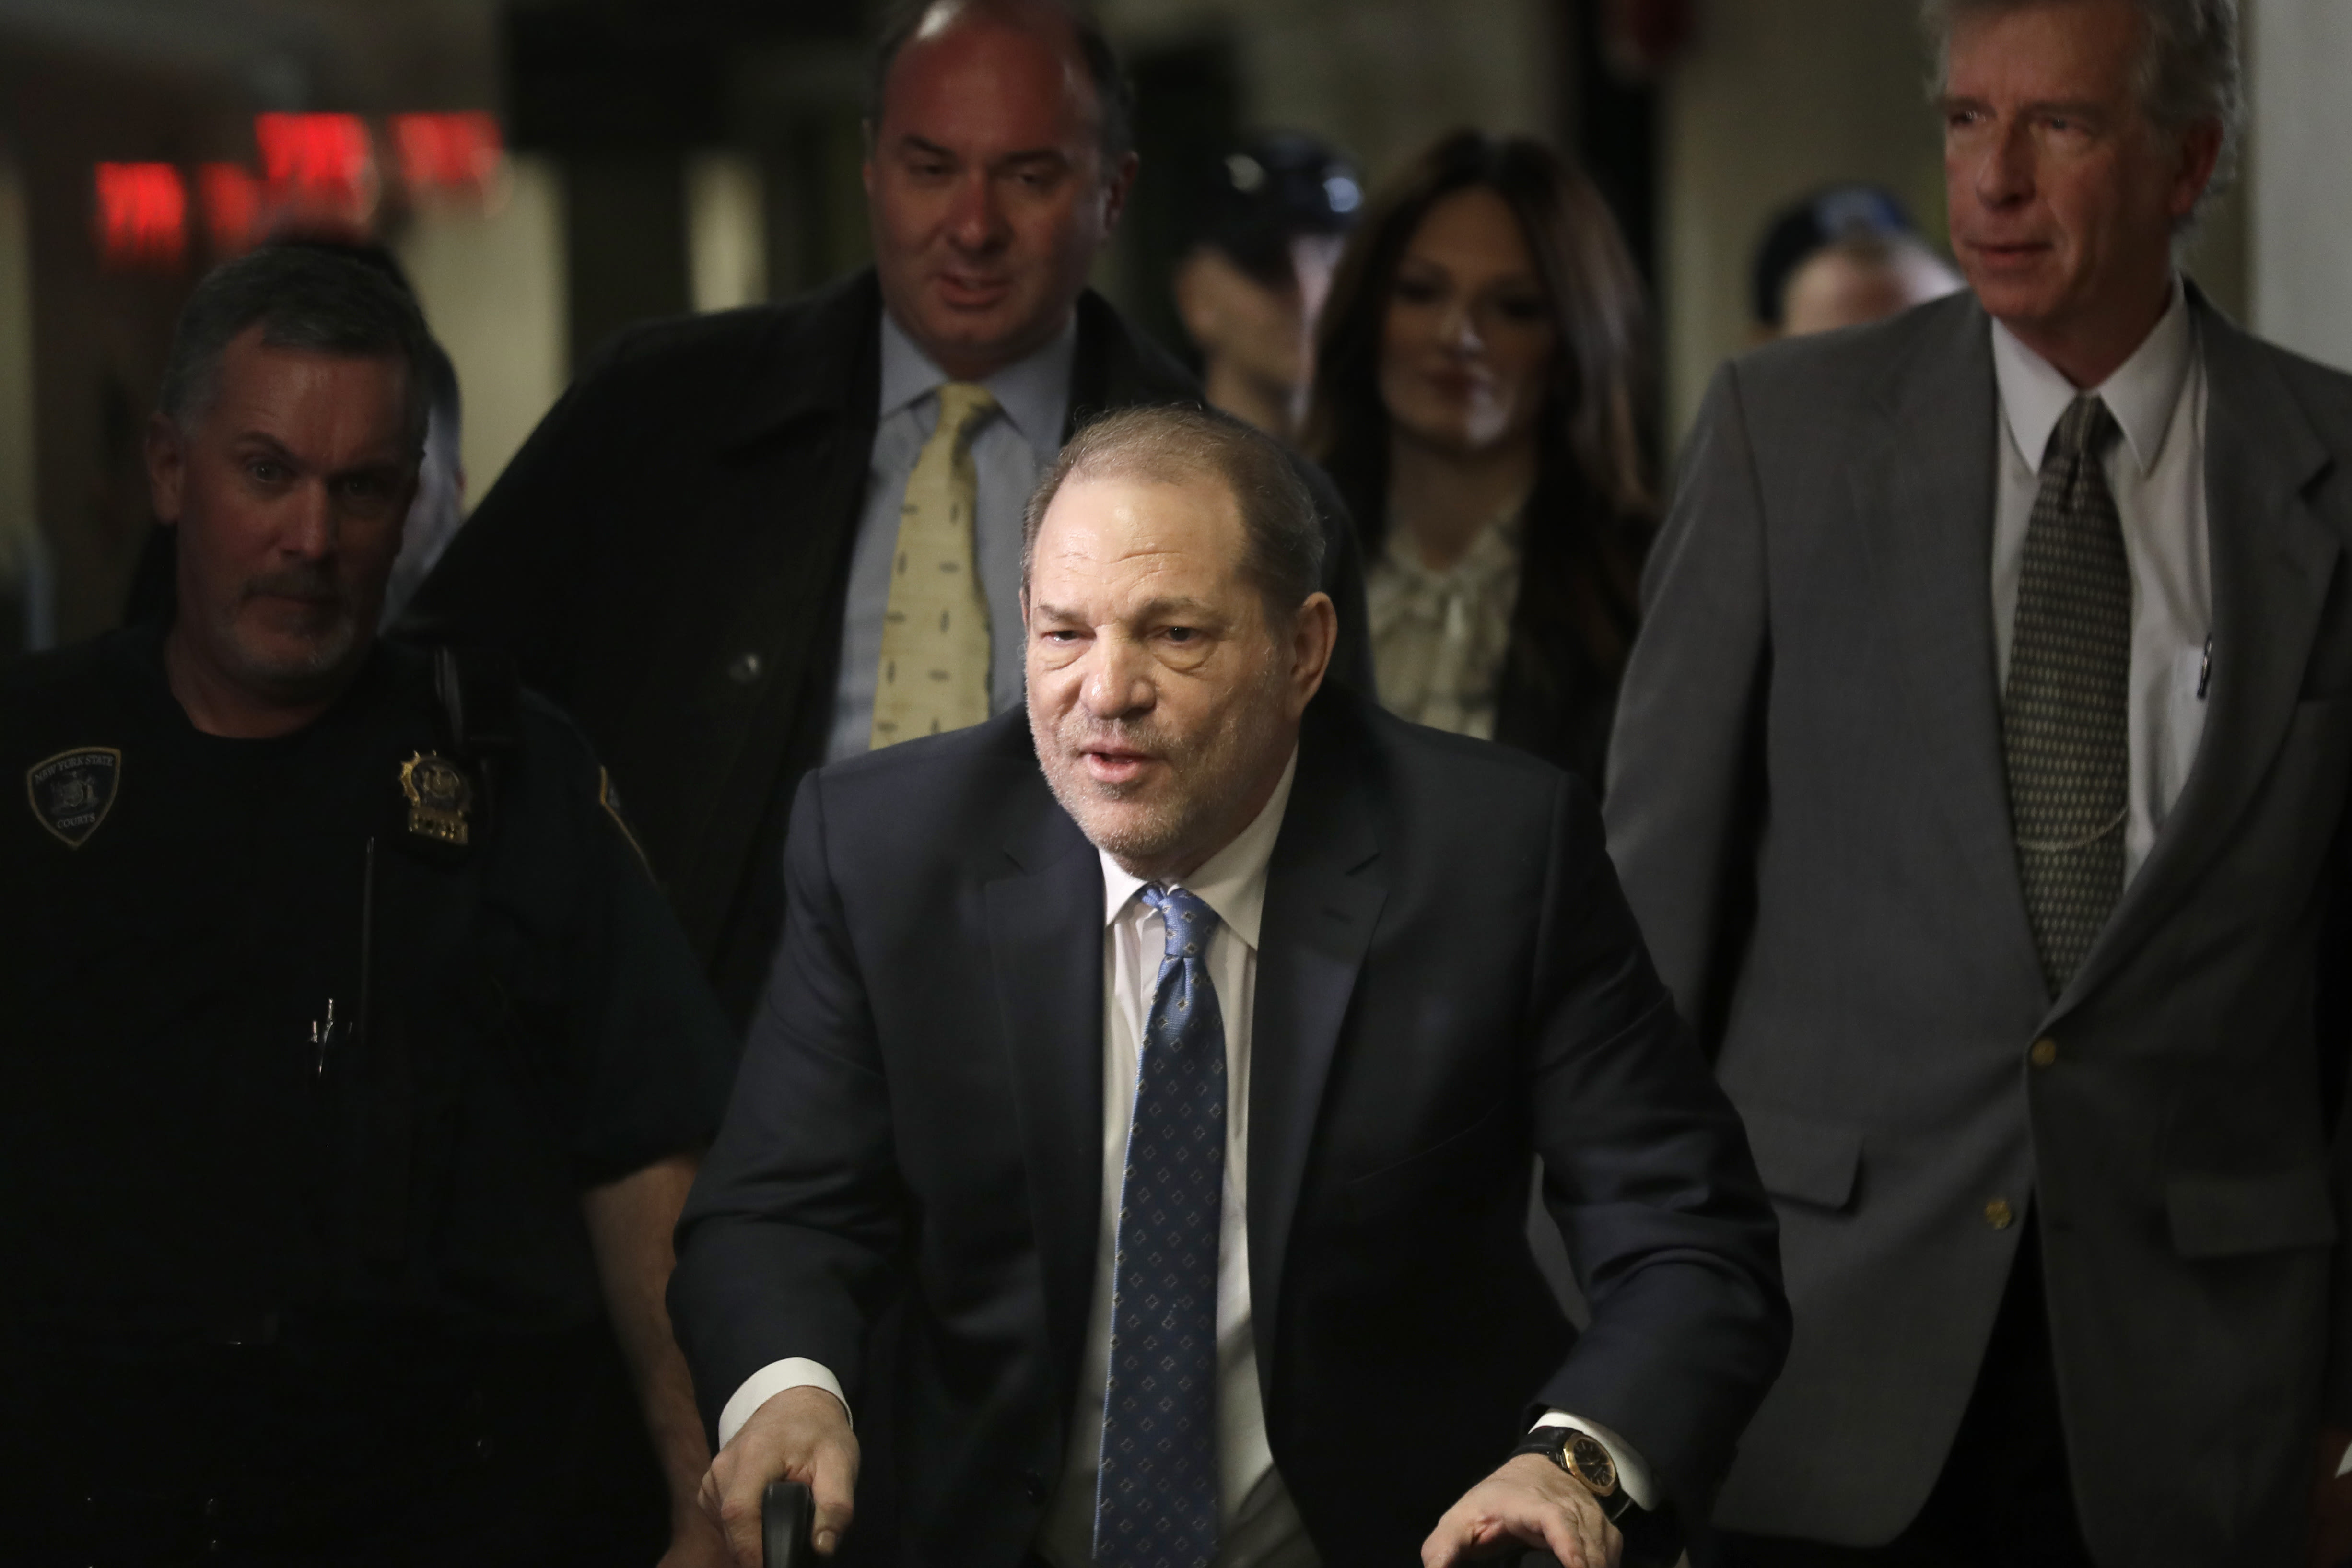 Harvey Weinstein's 2020 rape conviction overturned by New York appeals court: The latest